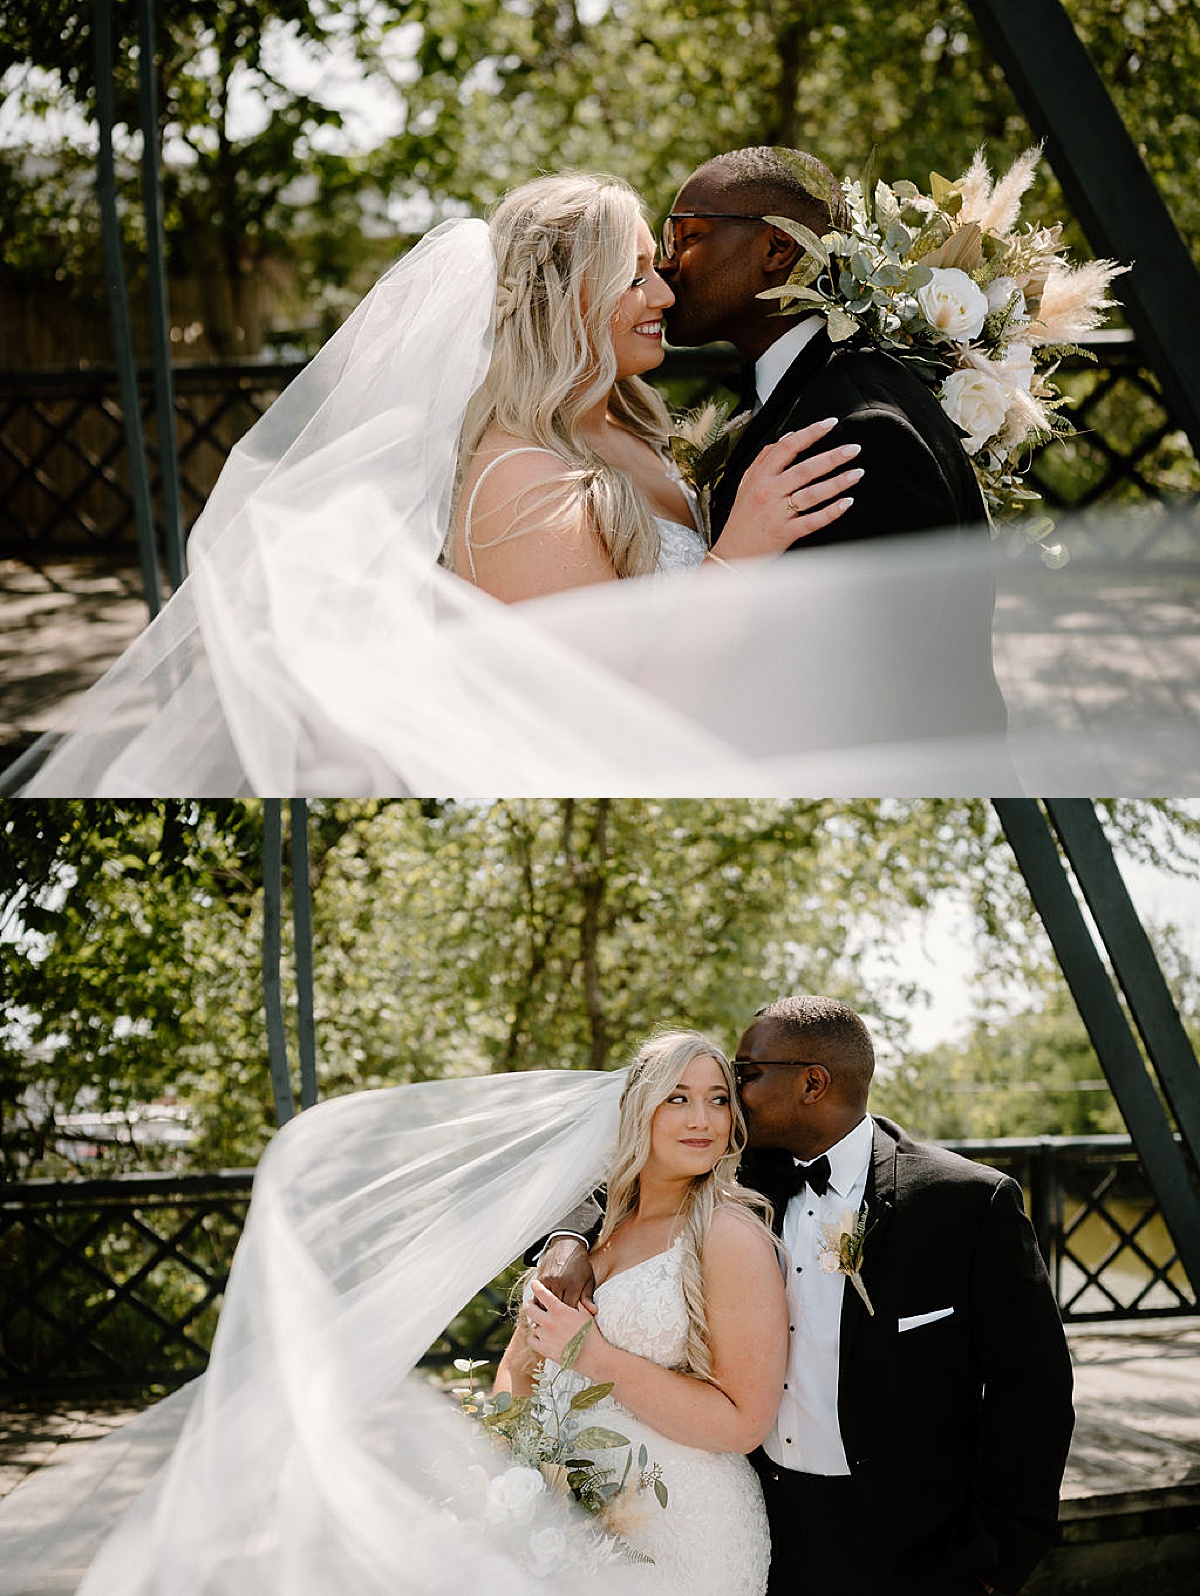 bride and groom kiss as veil blows in the wind on a sunny wedding day shot by Indigo Lace Collective